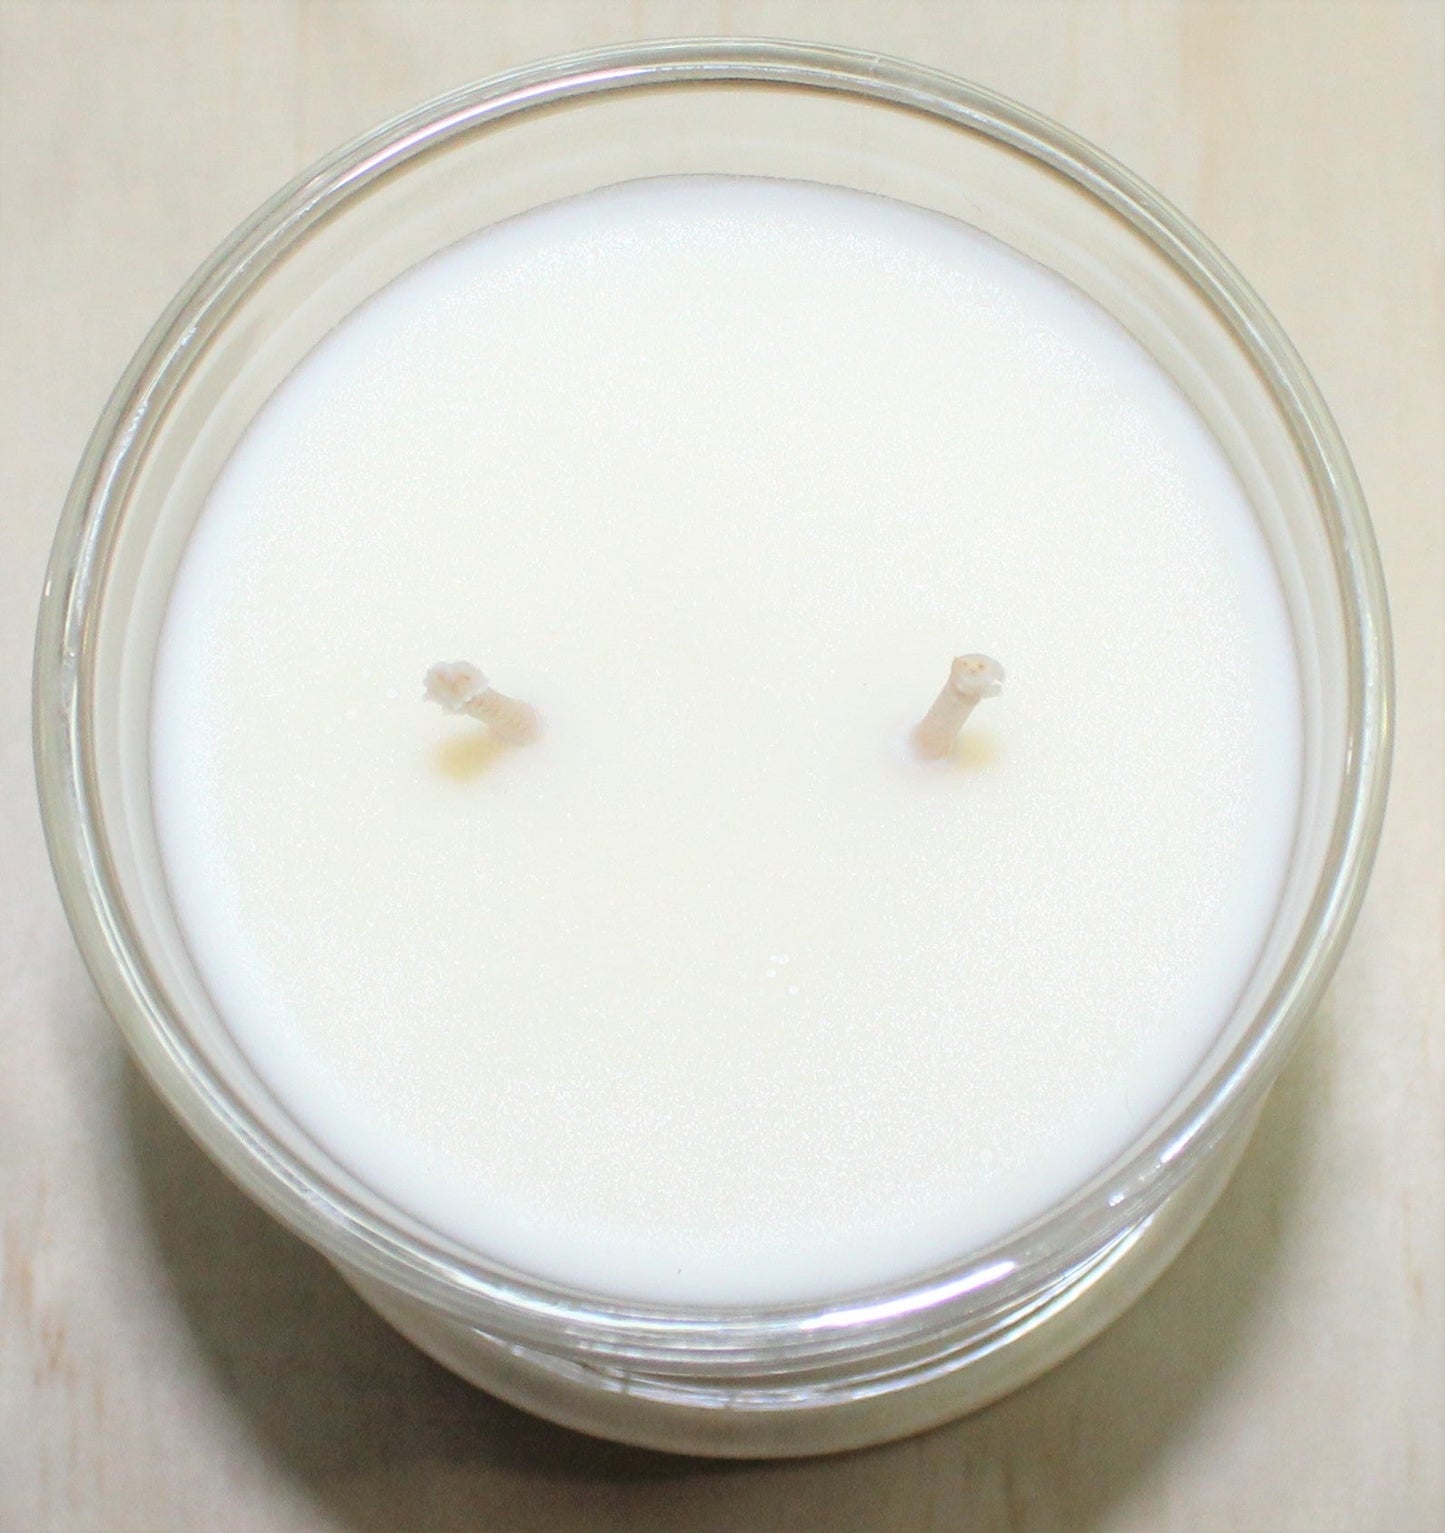 Vanilla Cove Soy Candle 50 hour Musk Sticks Fragrance in clear glass jar image shows 2 wicks